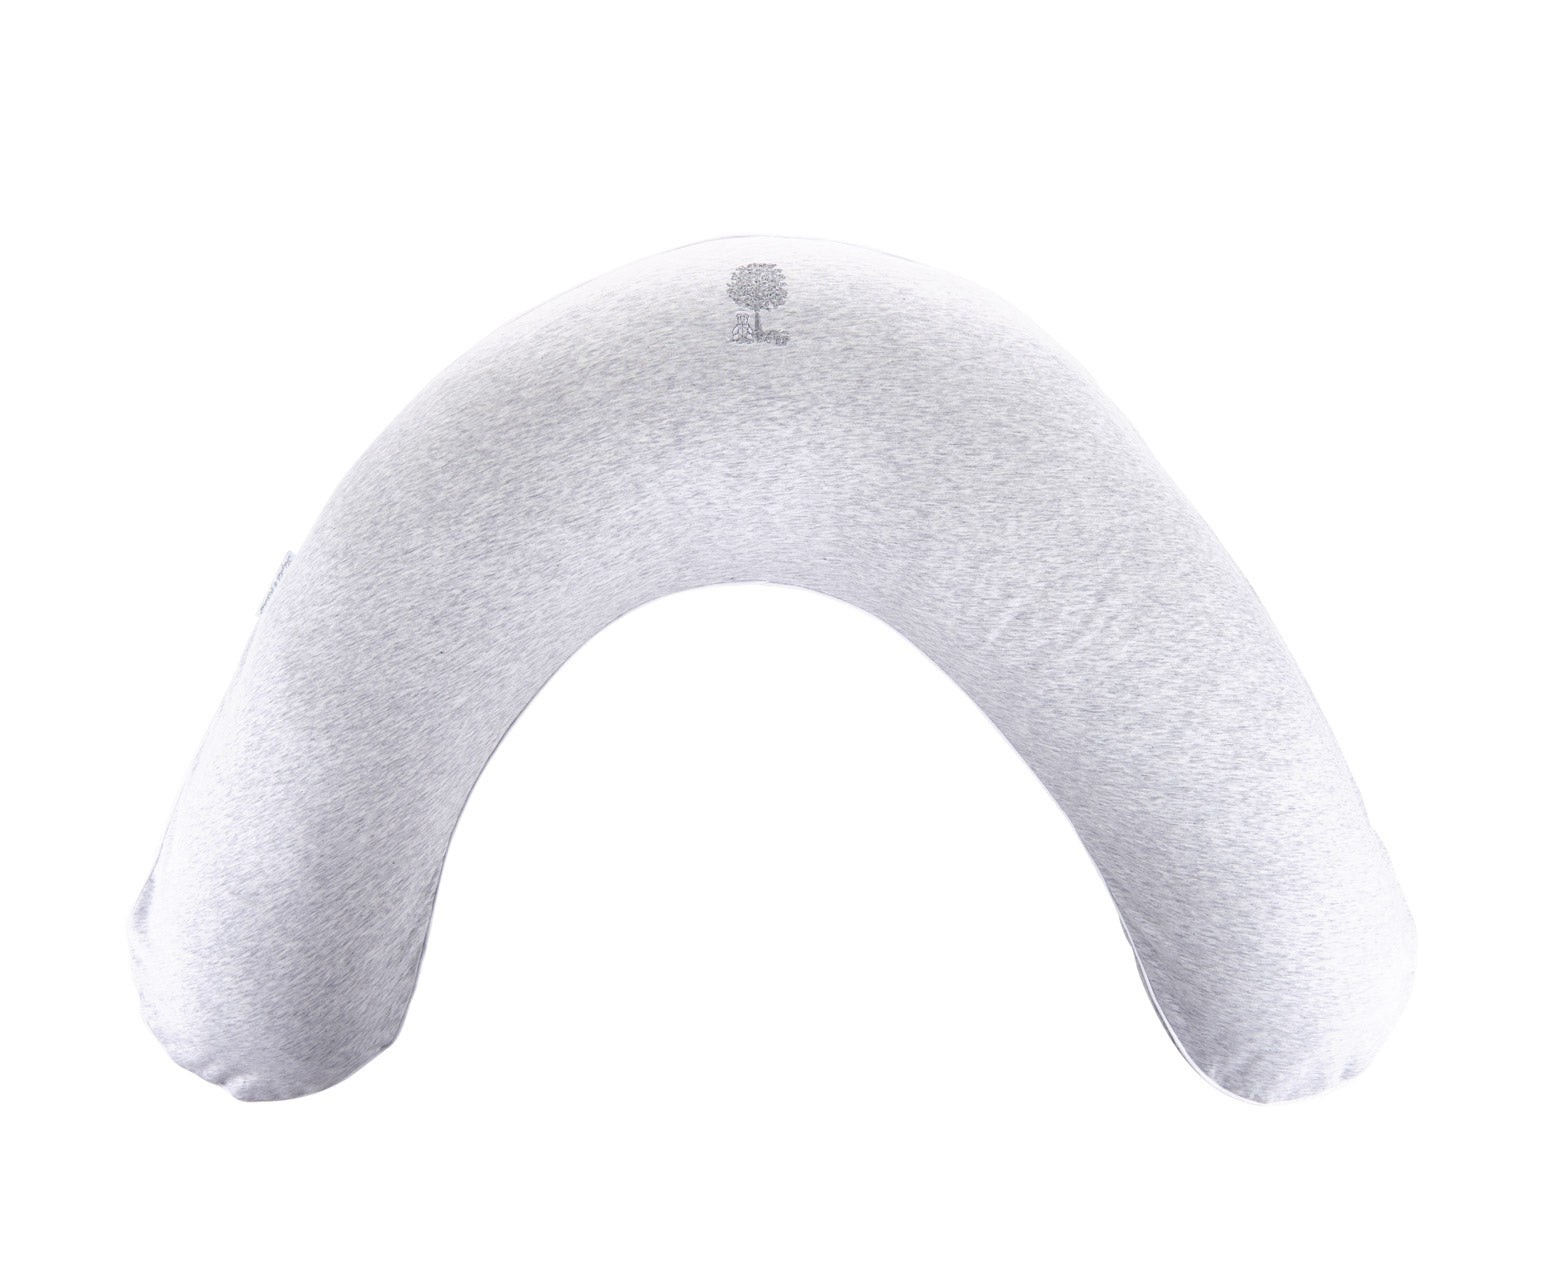 Theophile & Patachou the Maternity Pillow Jersey - Grey